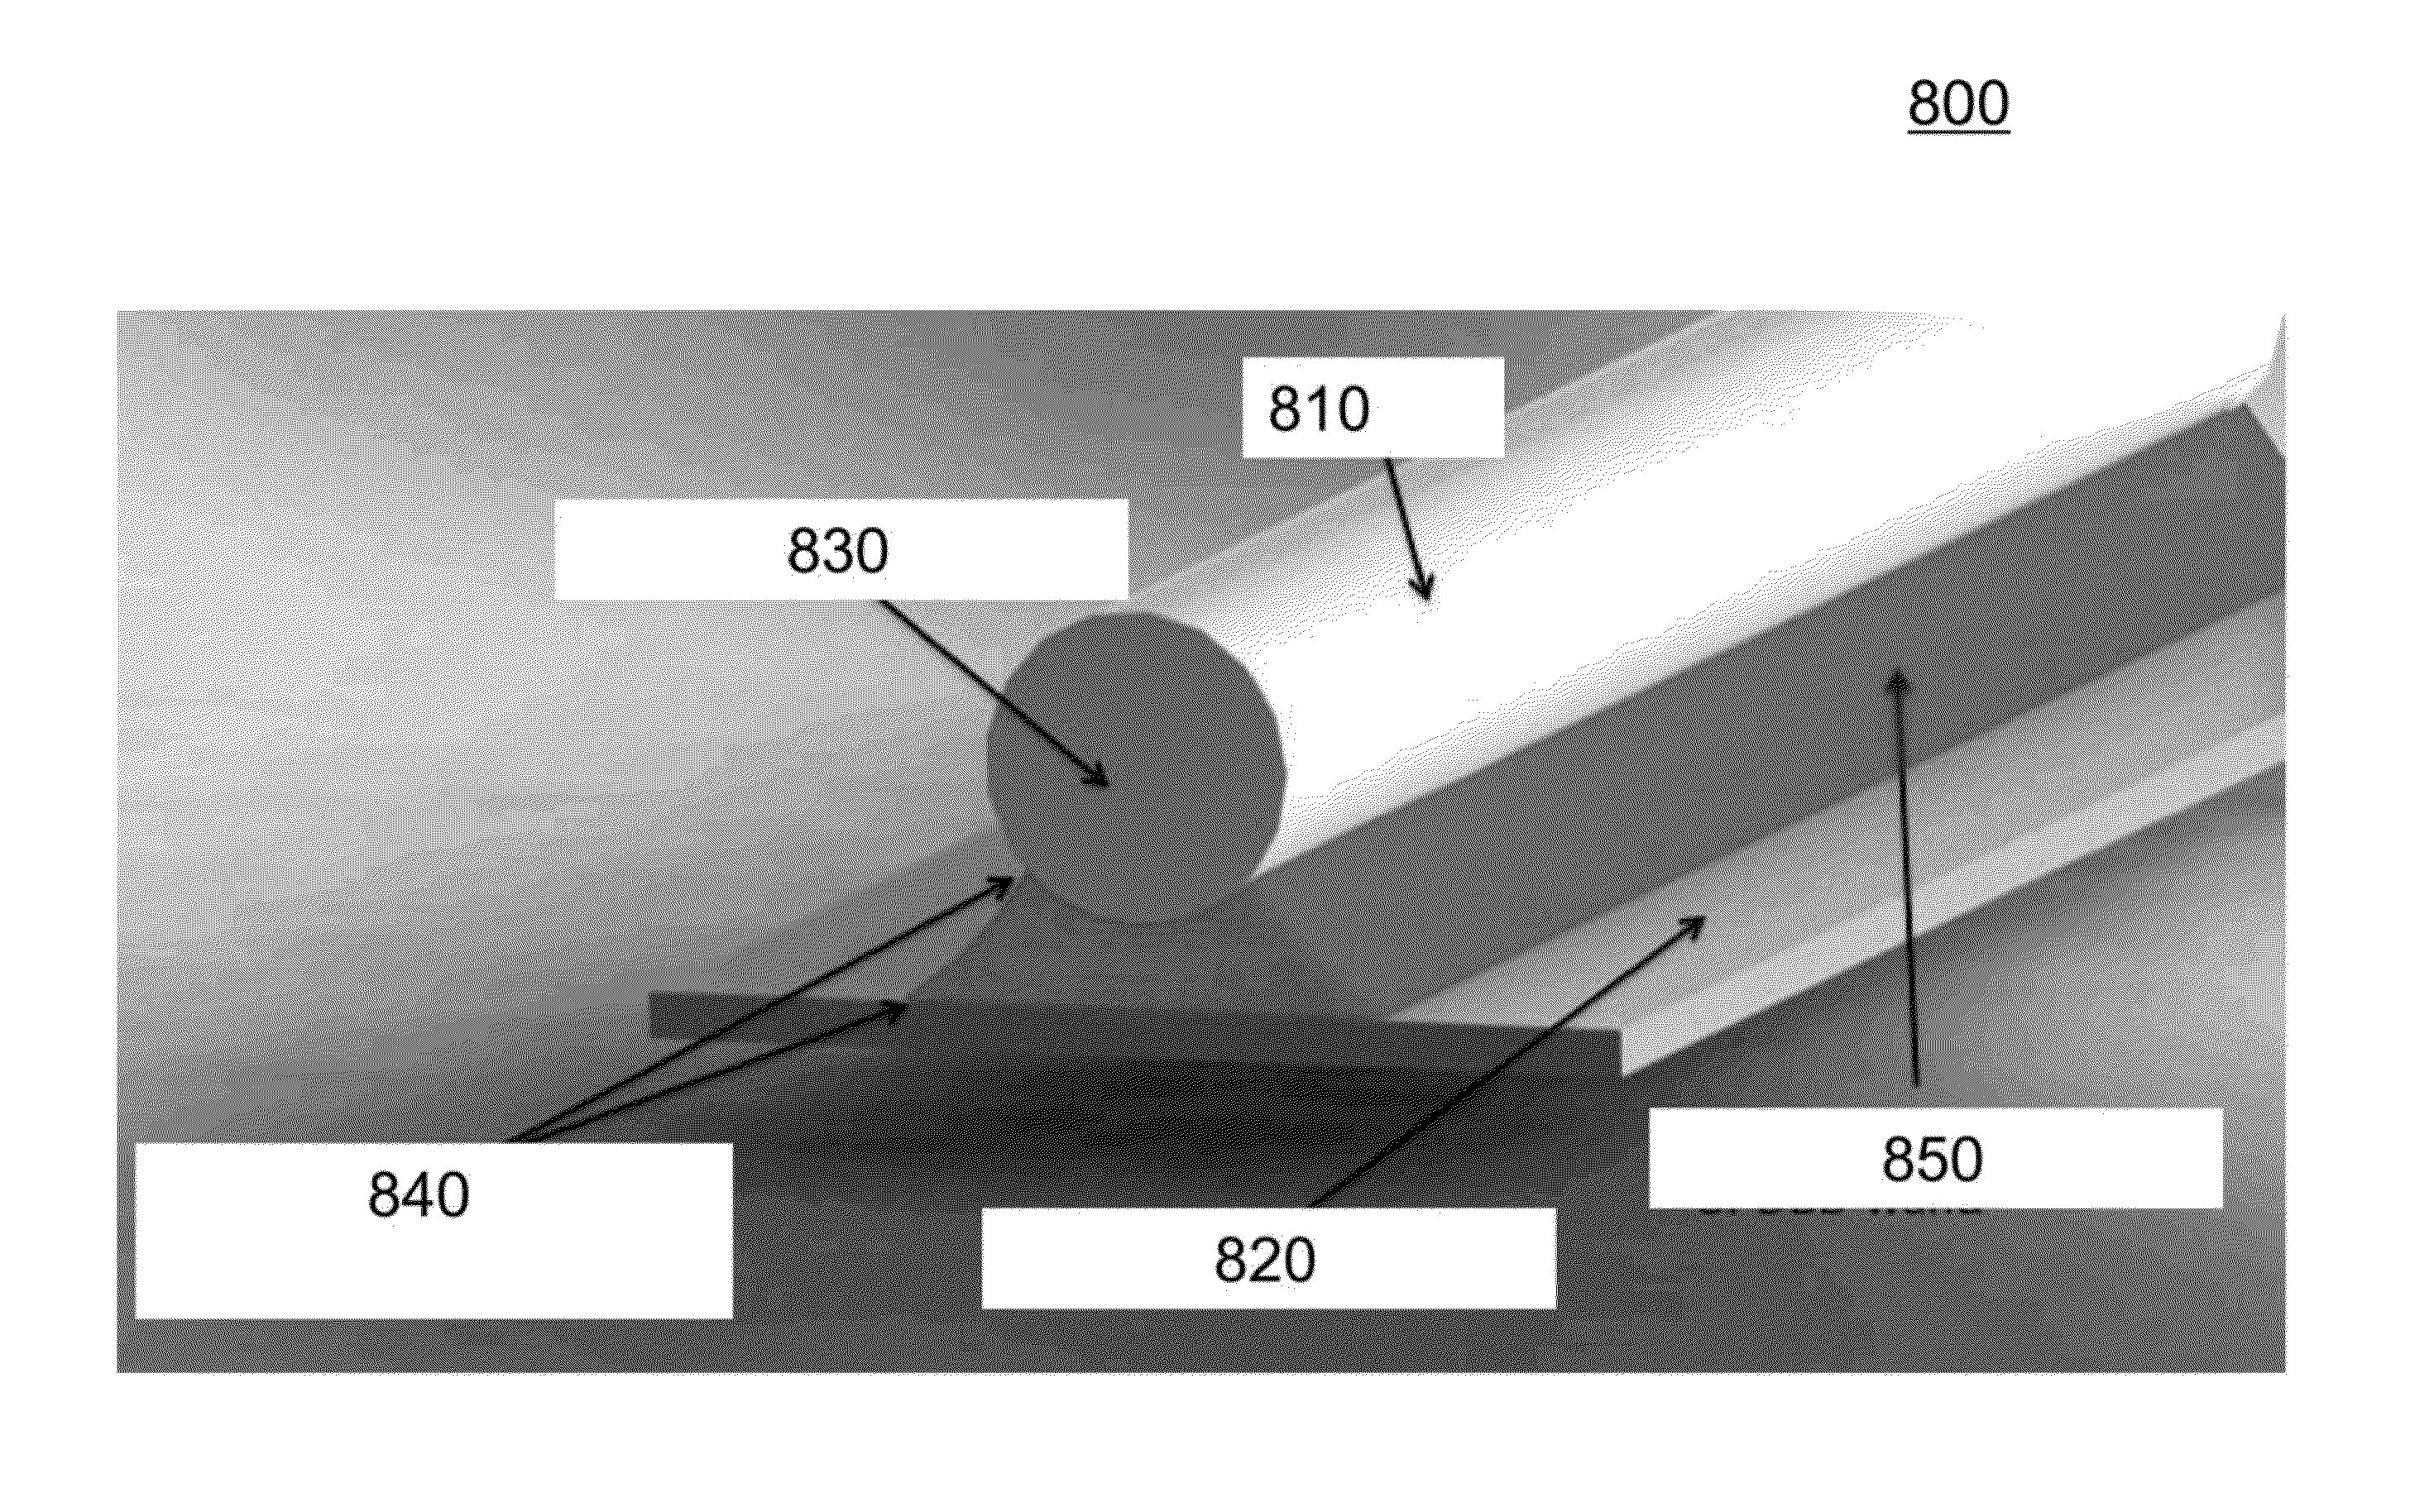 Method and apparatus for cold plasma food contact surface sanitation